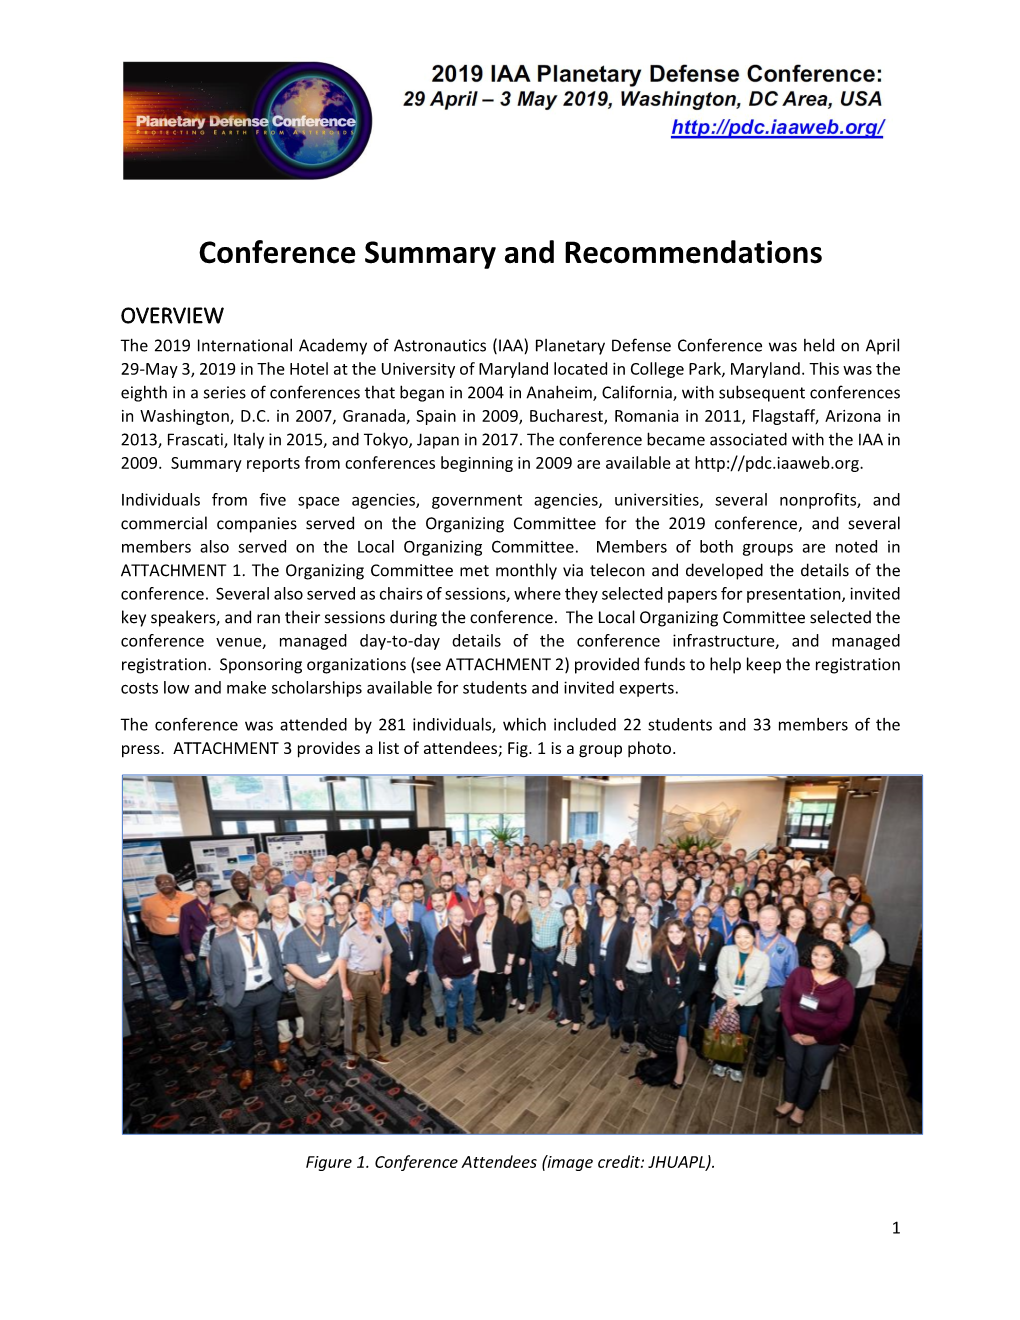 Conference Summary and Recommendations